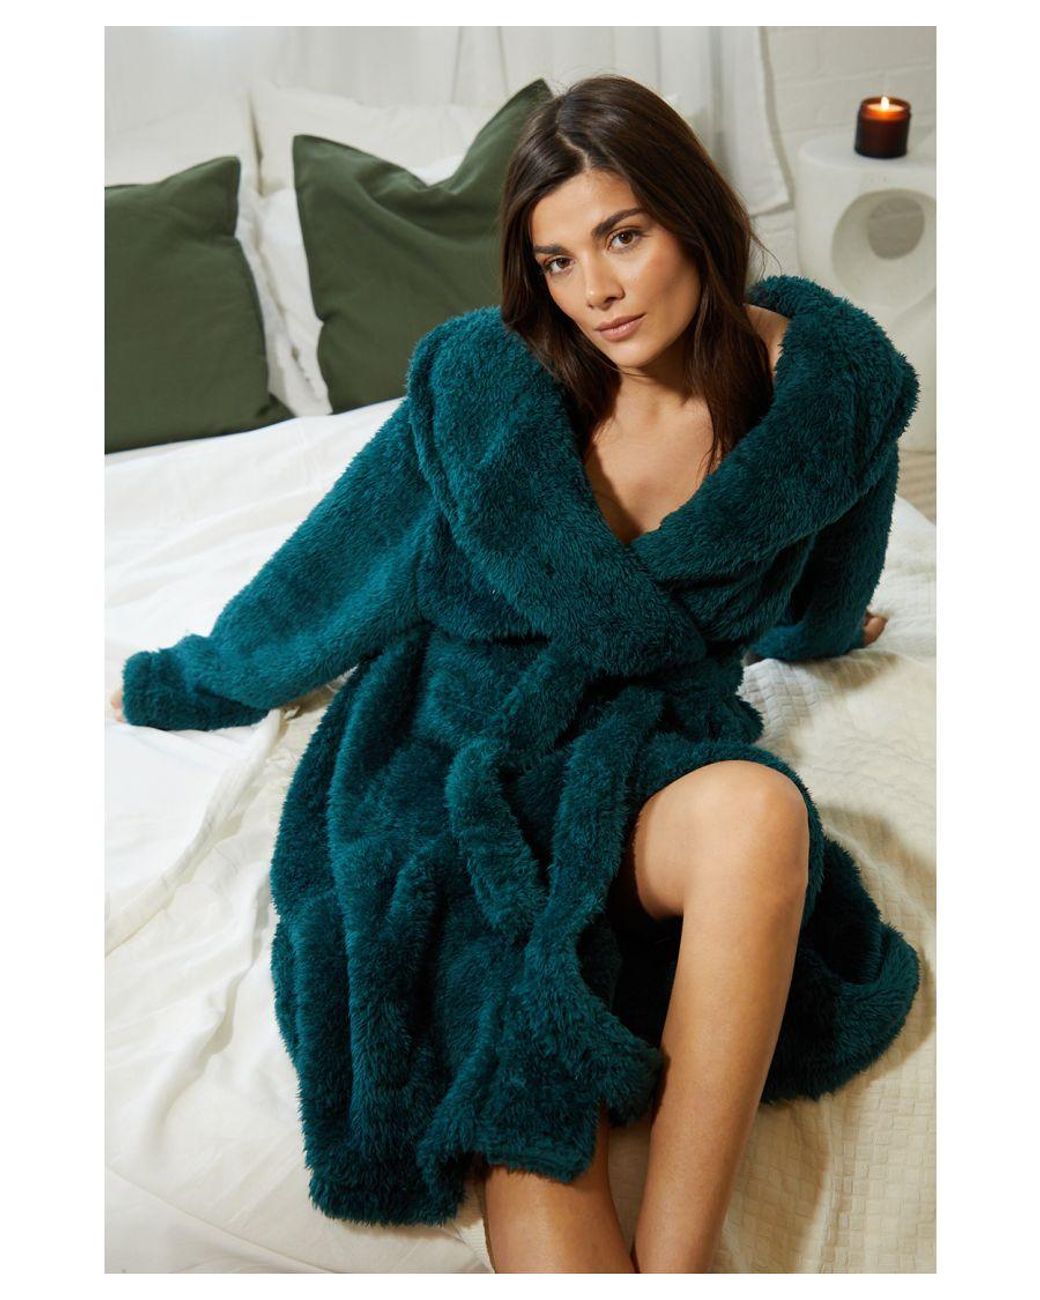 Discover more than 272 teal dressing gown super hot